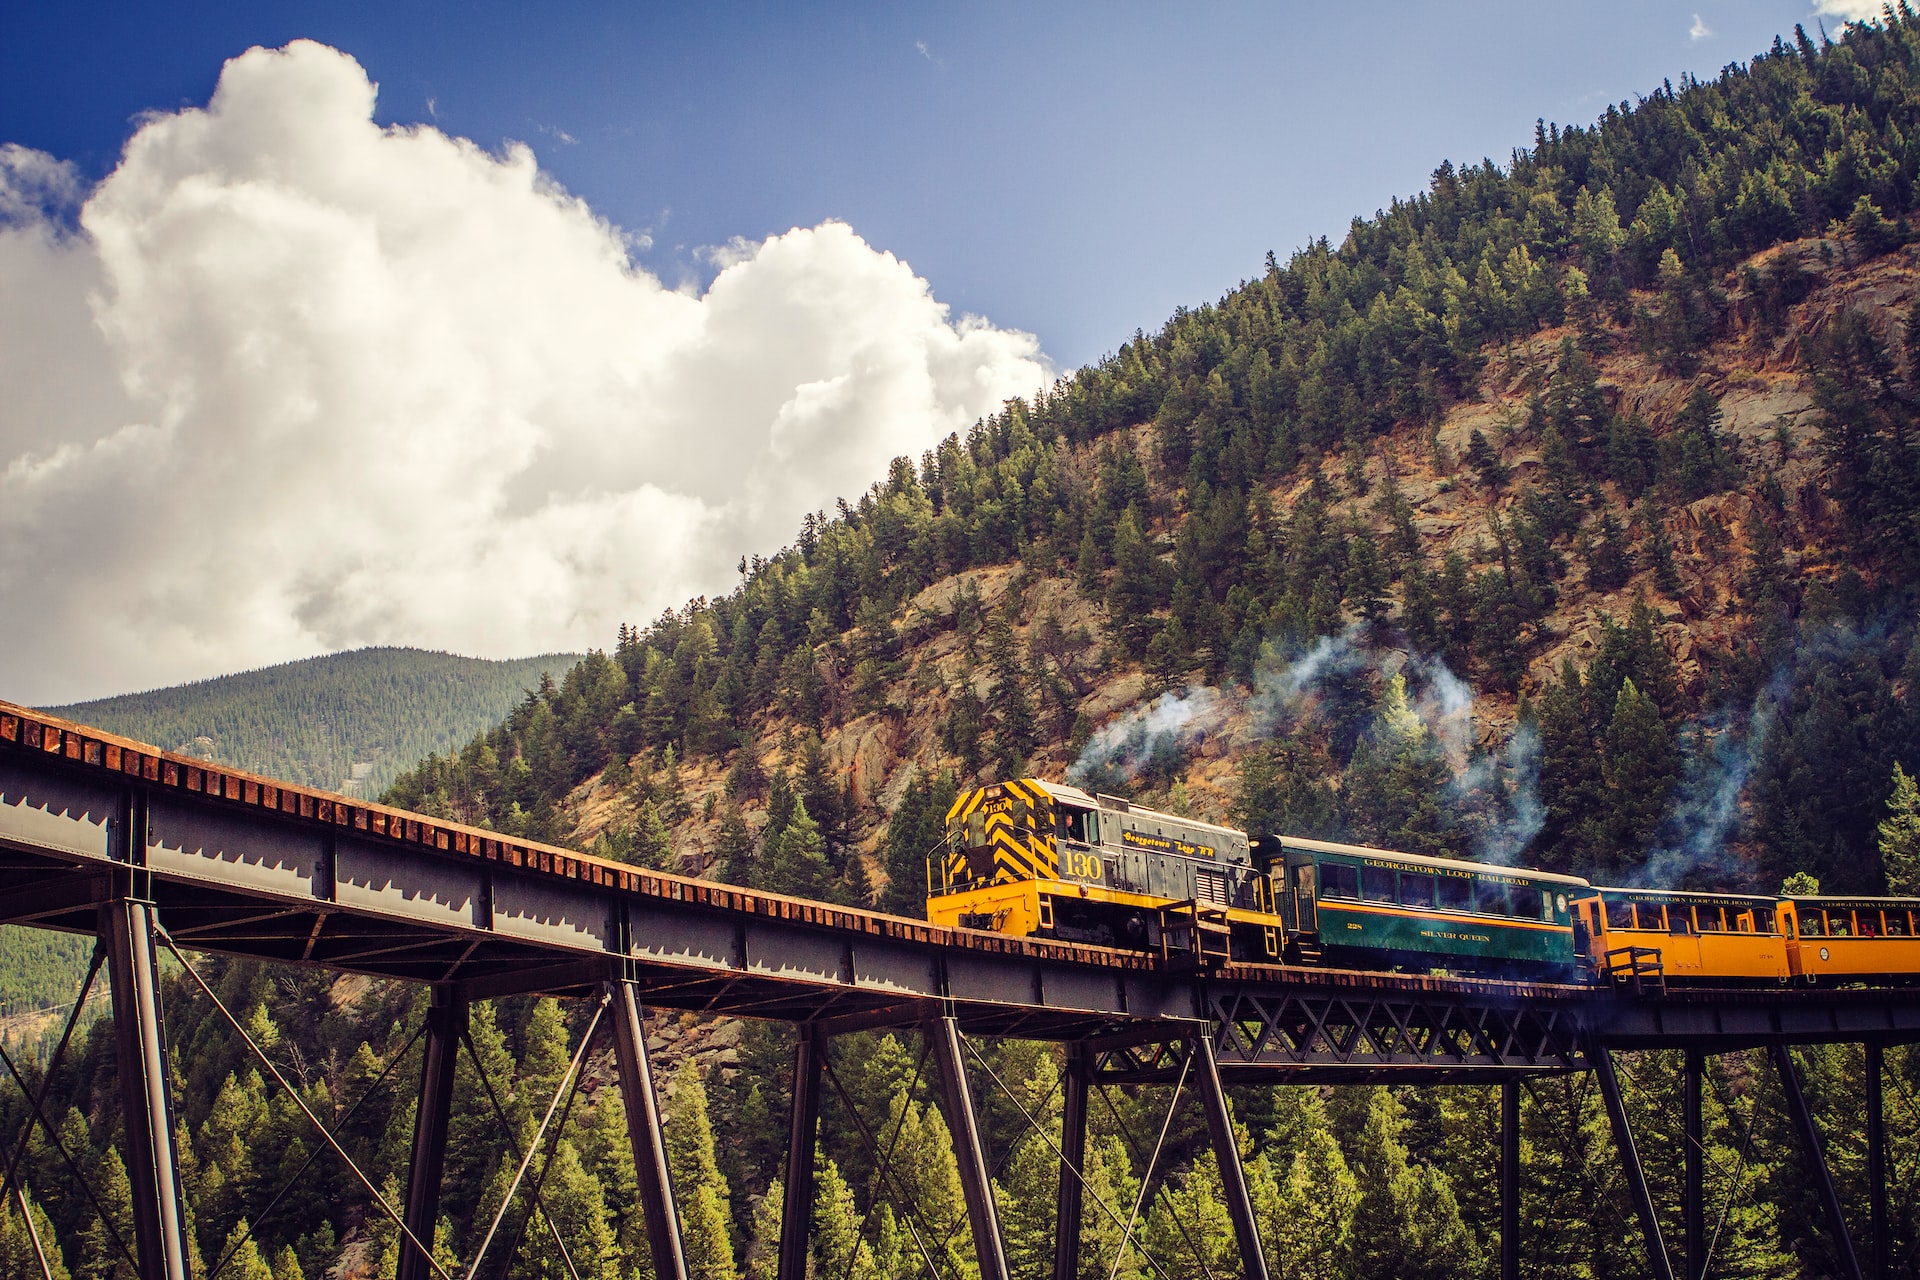 A train riding high on trestles with a mountain covered in pine trees behind.